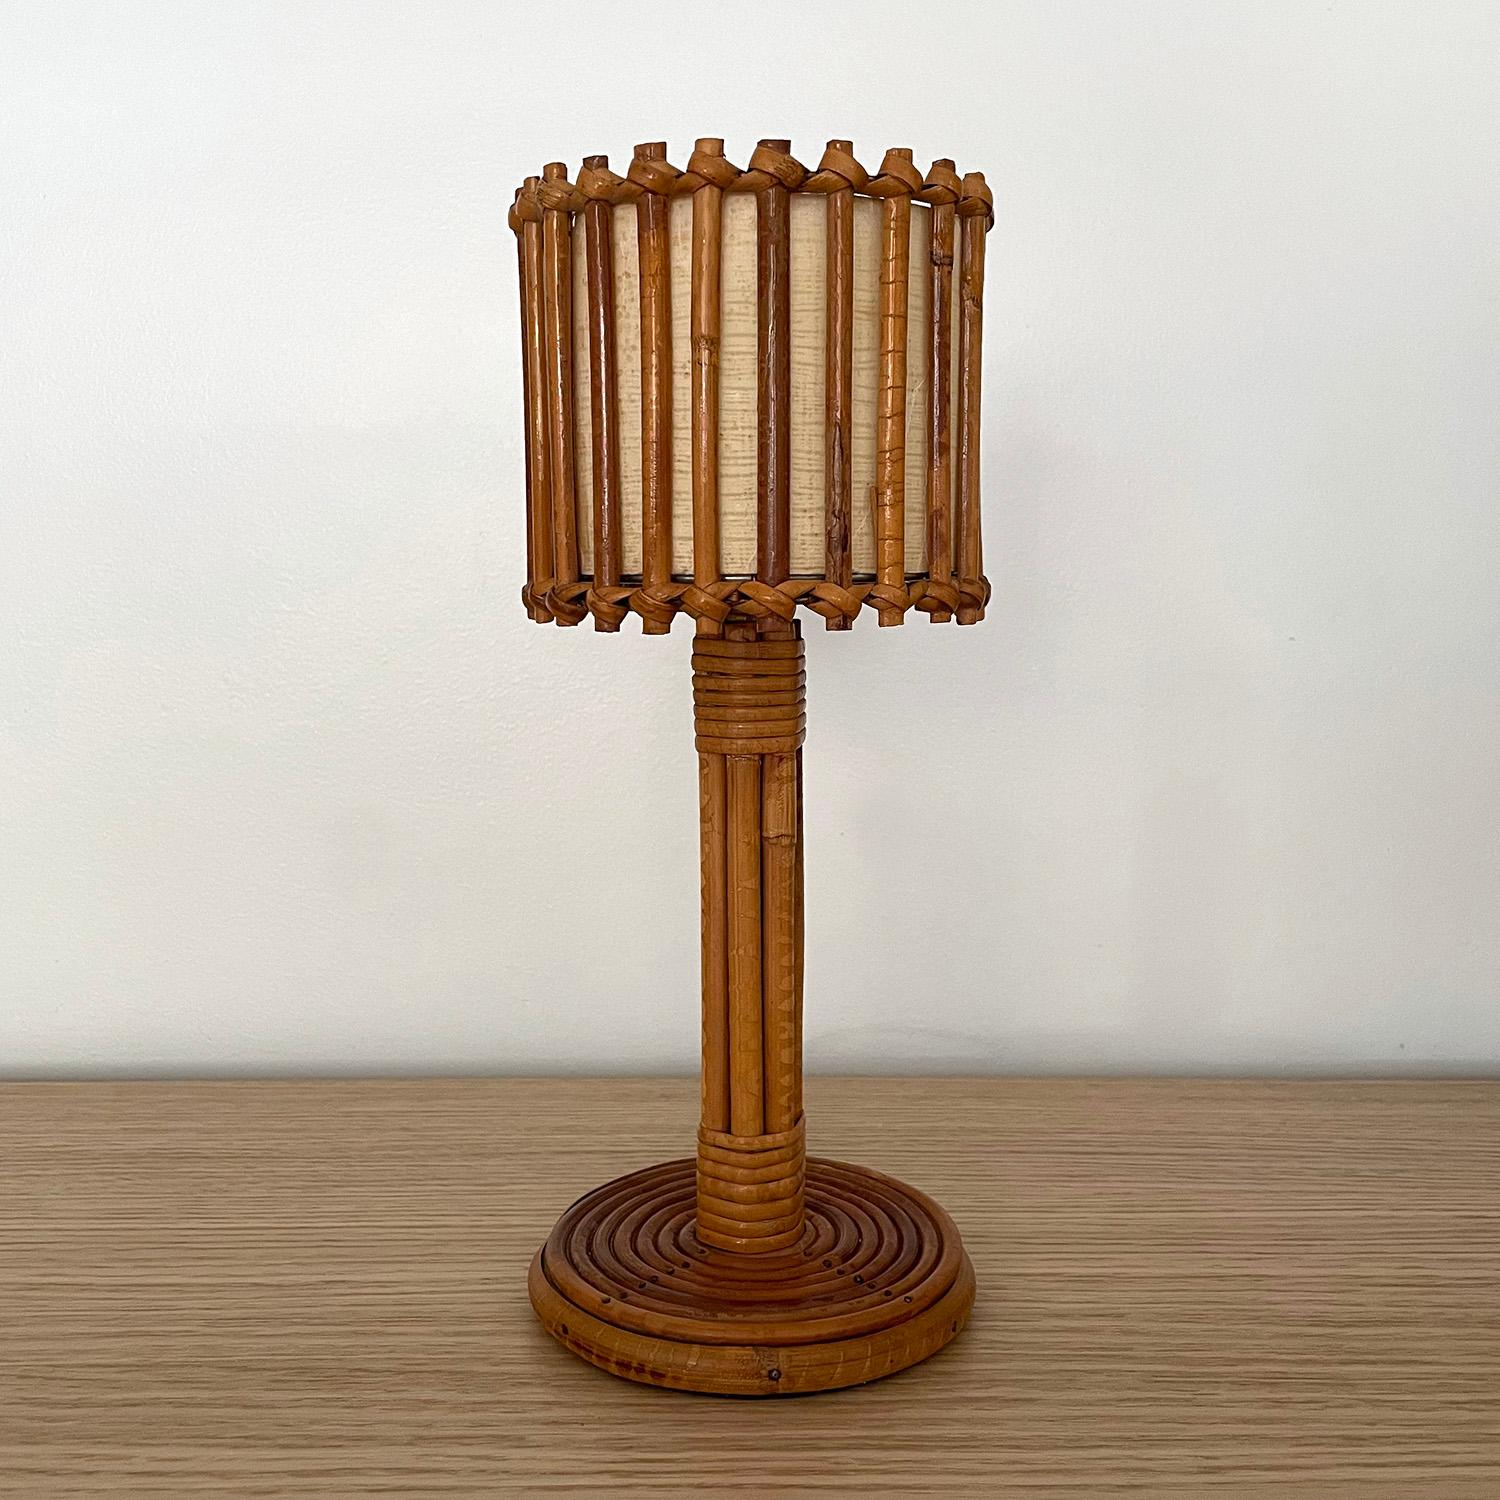 Louis Sognot French rattan table lamp
France, circa 1960’s
Vertical rattan reeds are intricately woven around the drum shade
Original linen interior lining has light surface markings and two areas of metal reinforcements
Lamp base is comprised of